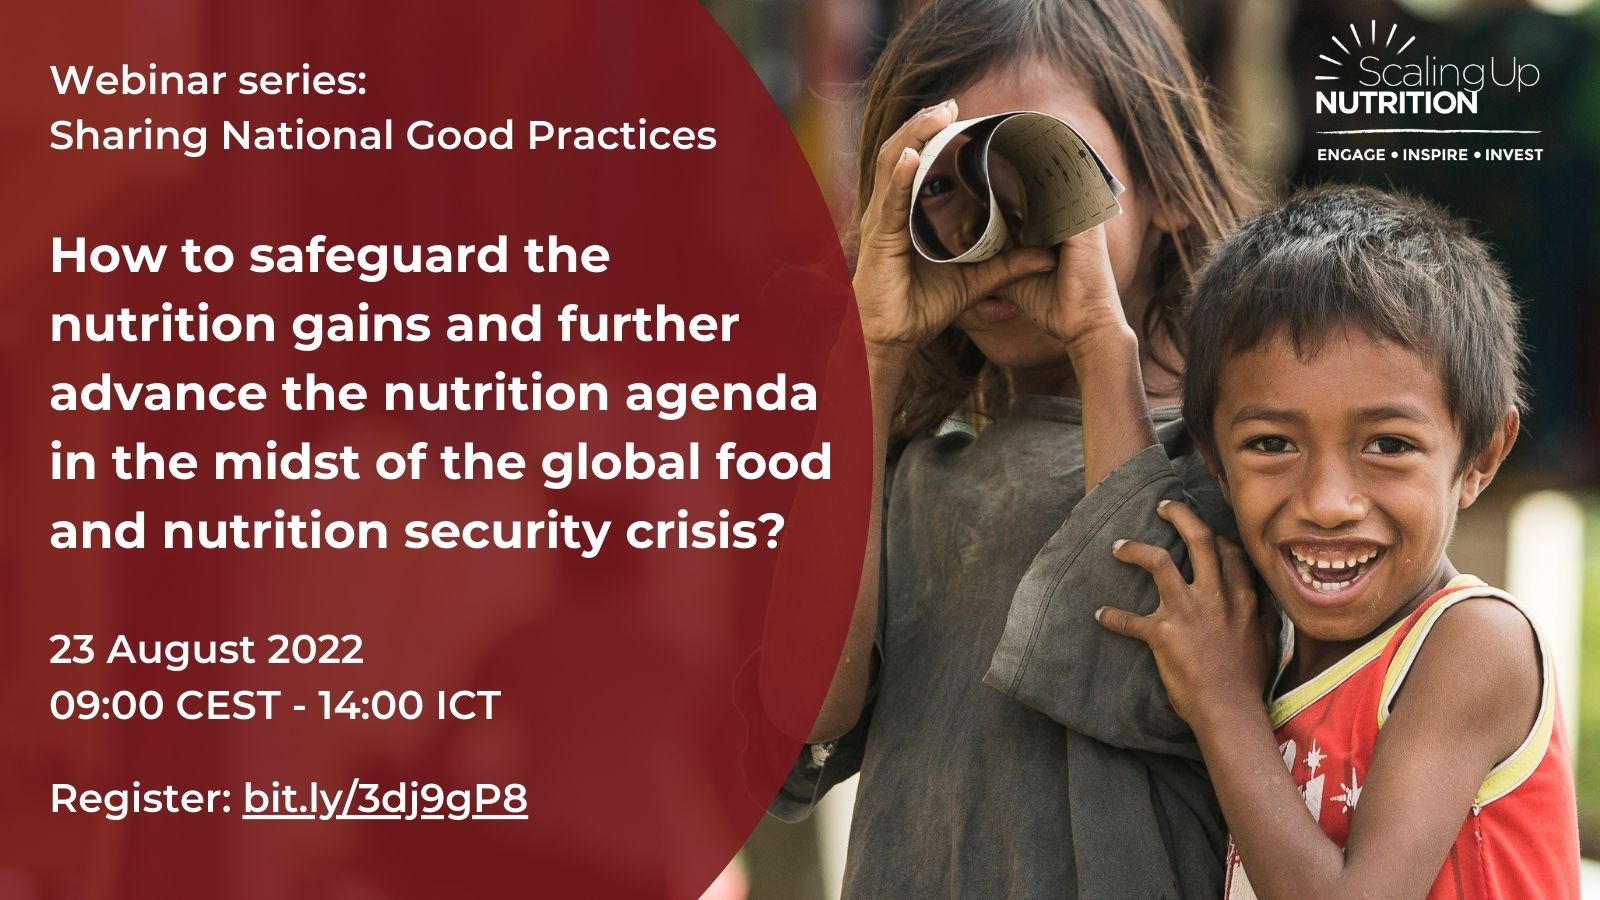 Asia: Sharing National Good Practices -   How to safeguard the nutrition gains and further advance the nutrition agenda in the midst of the global food and nutrition security crisis?